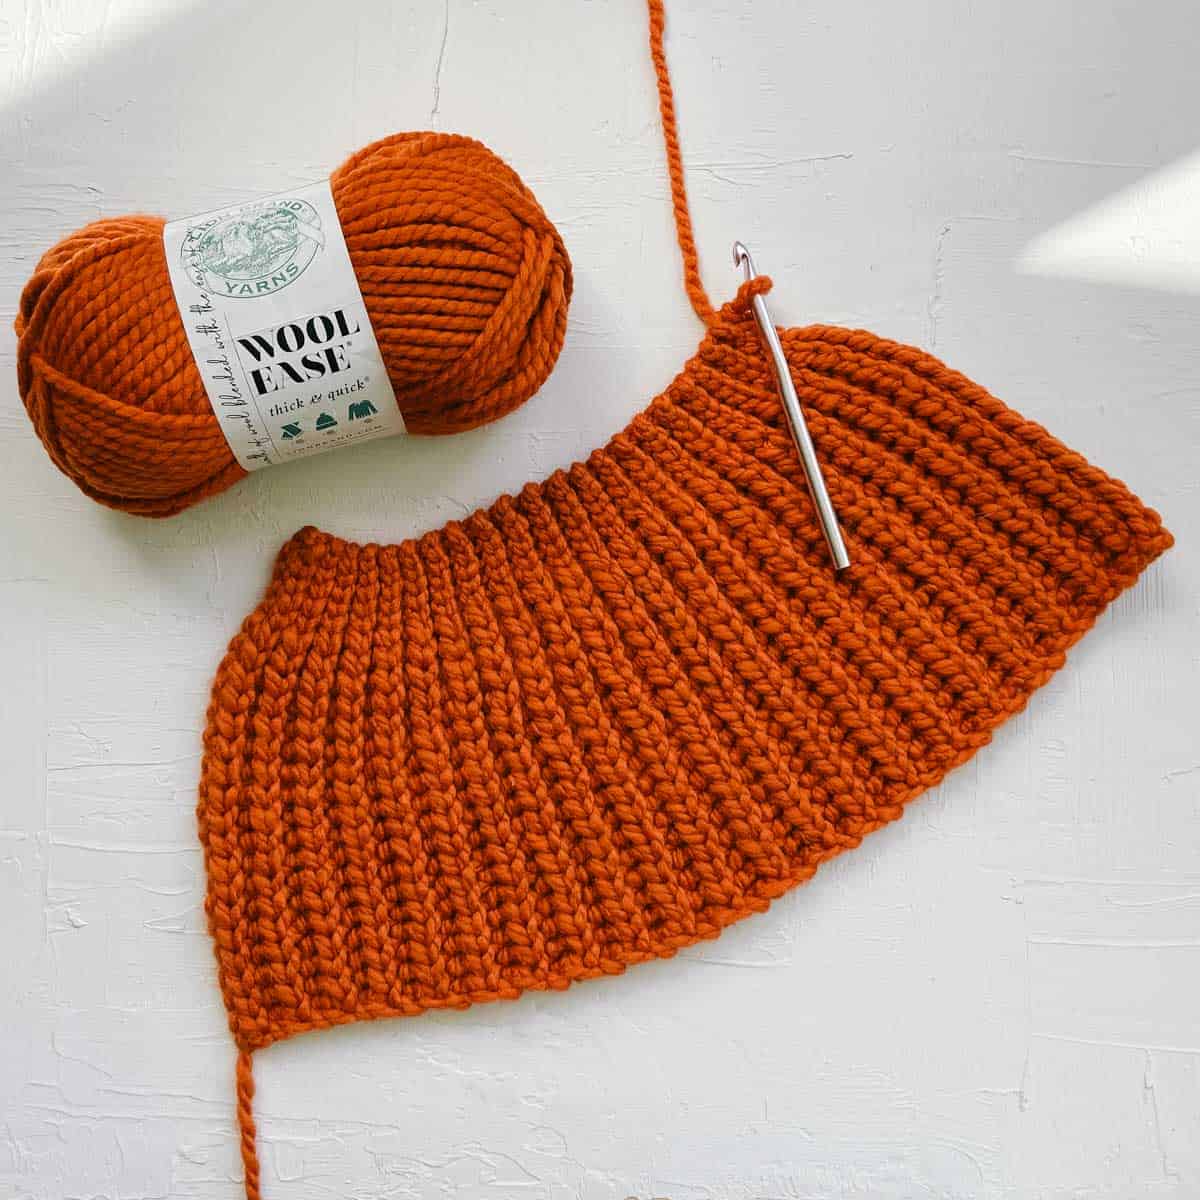 Crochet trapezoid made with Pumpkin colored Wool-Ease Thick & Quick yarn.